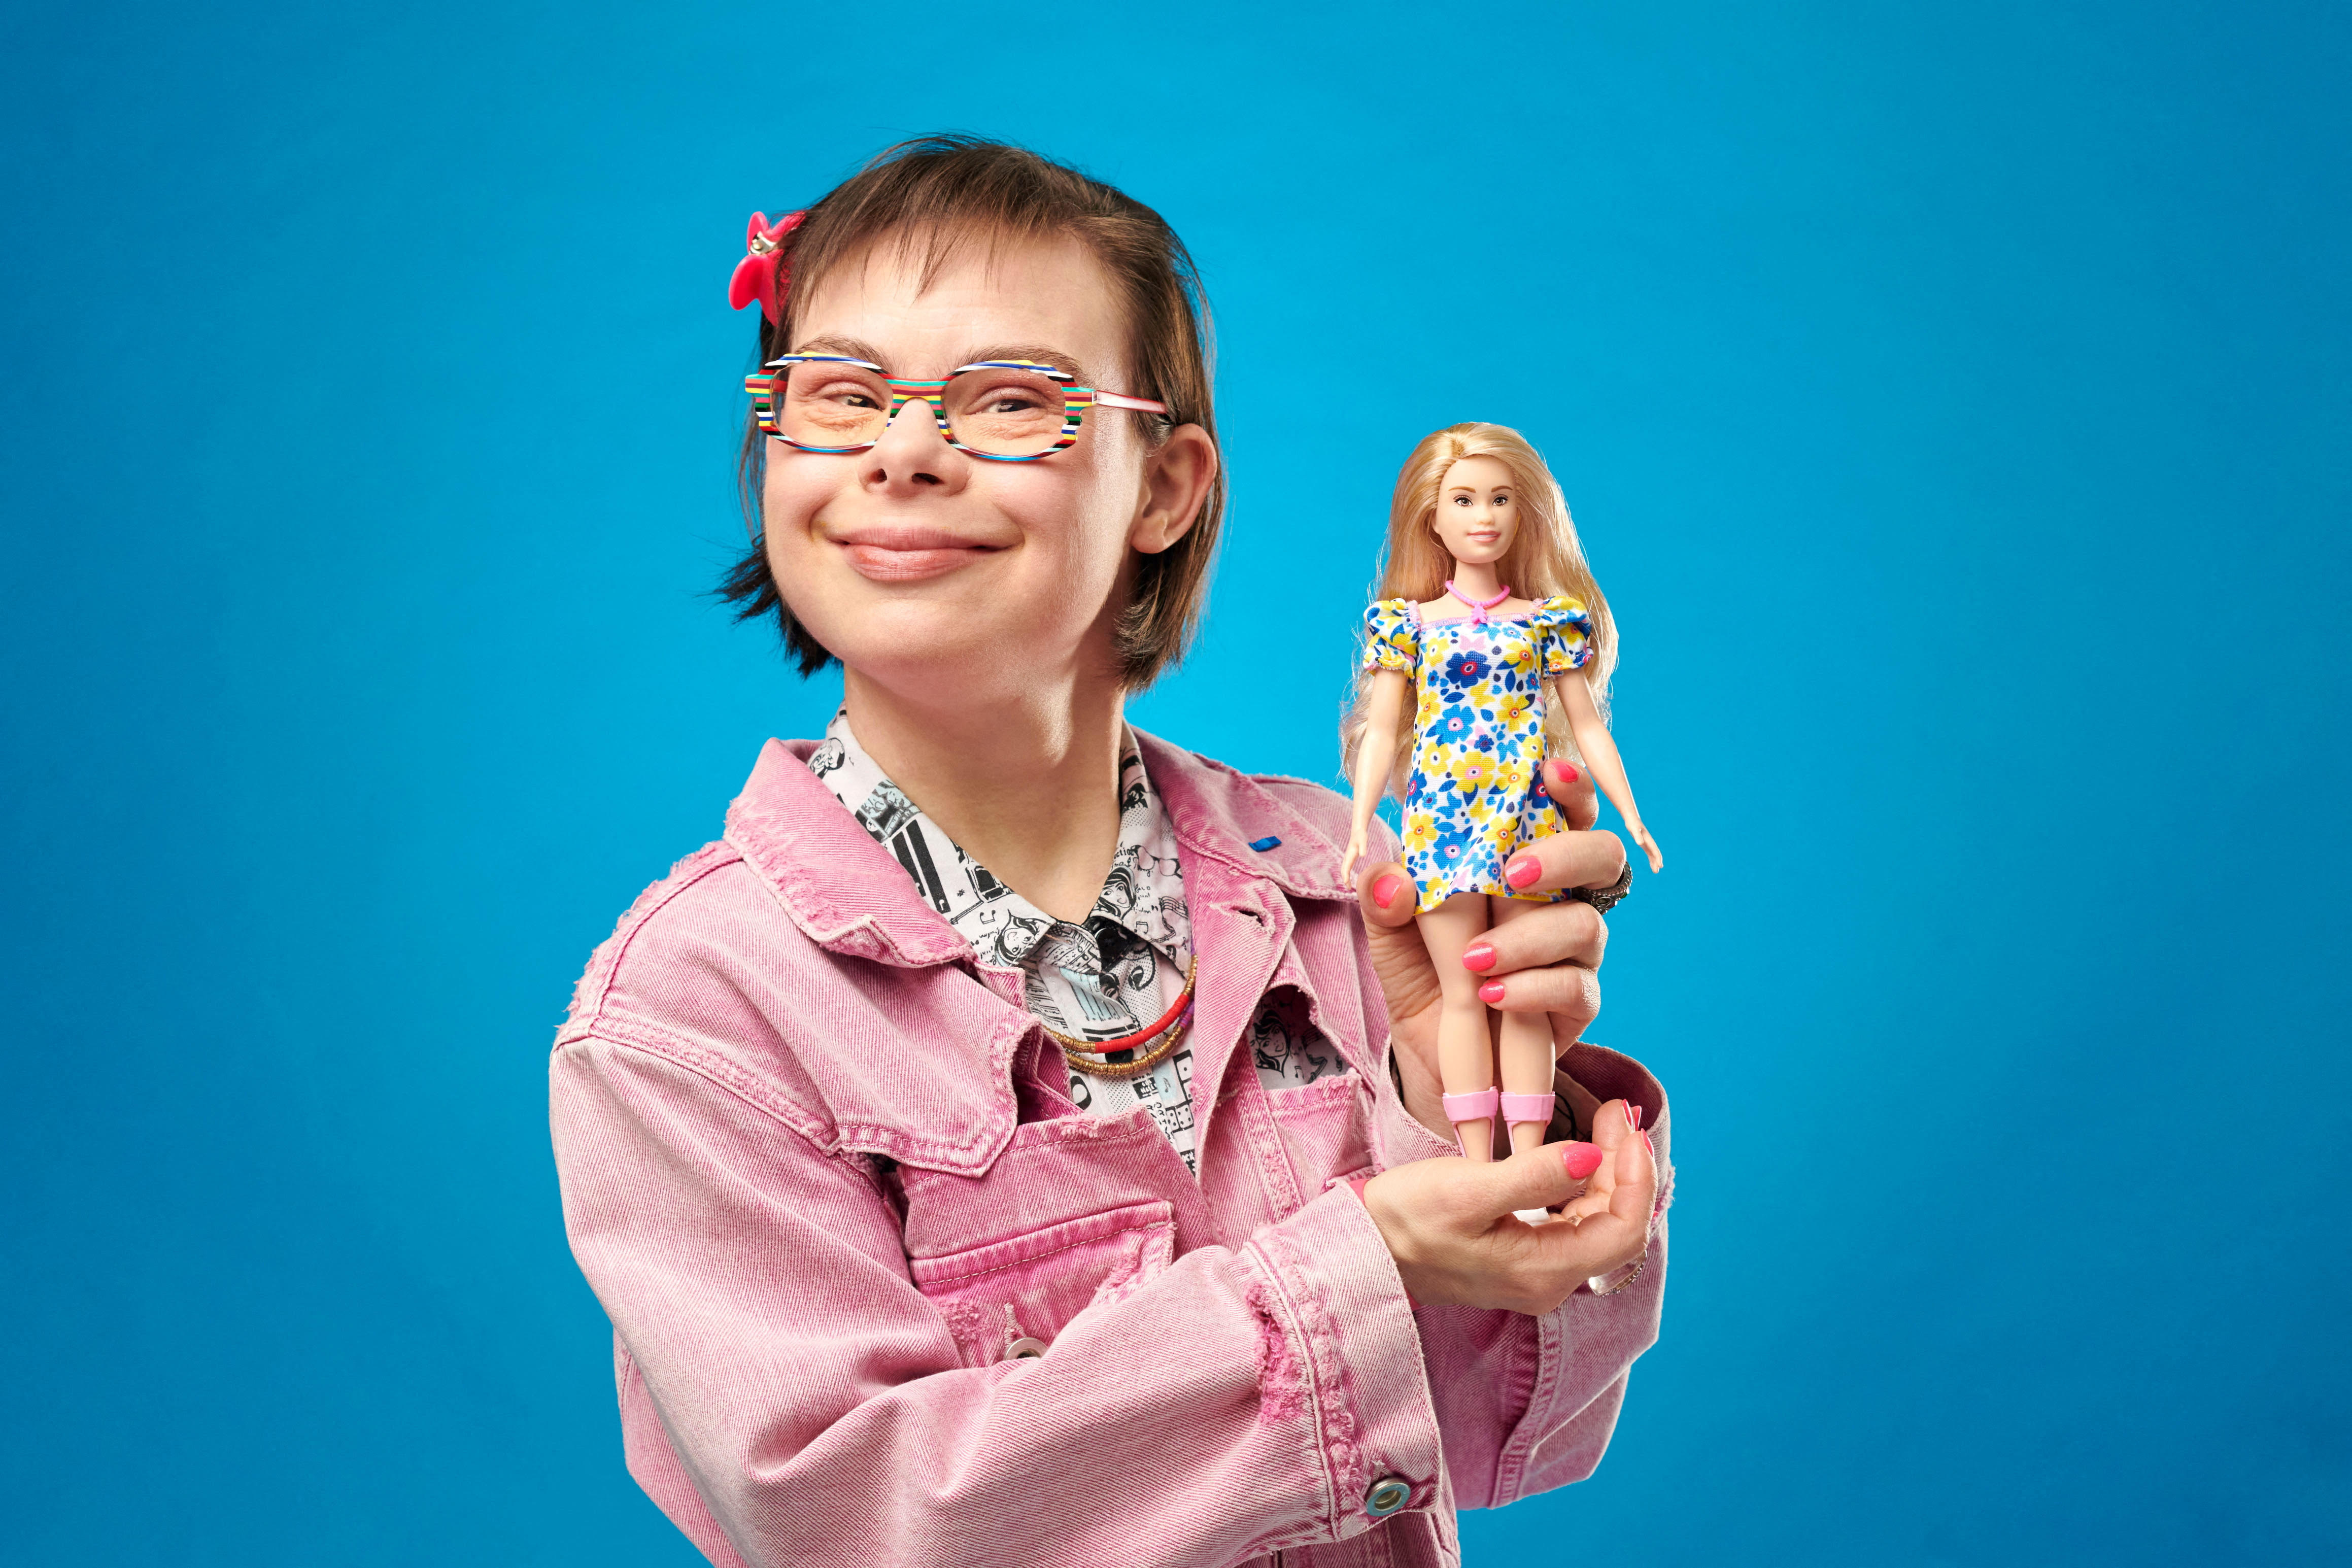 Celebrating Diversity with Mattel’s New Release of a Down Syndrome Barbie Doll Image